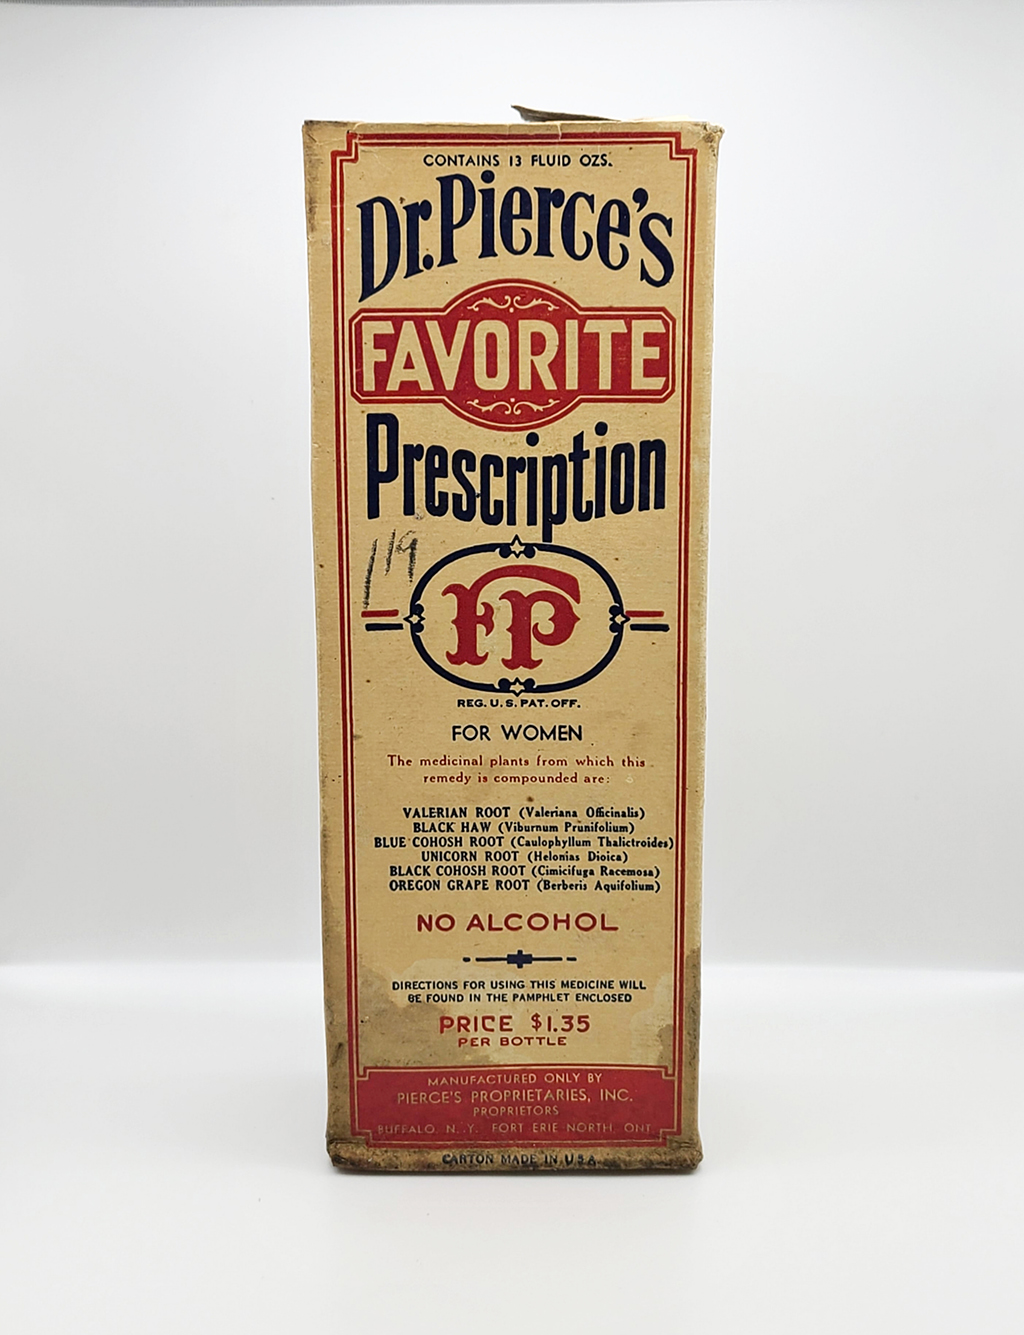 Ivory, red and blue box contains a label for "Dr. Pierce's Favorite Prescription"